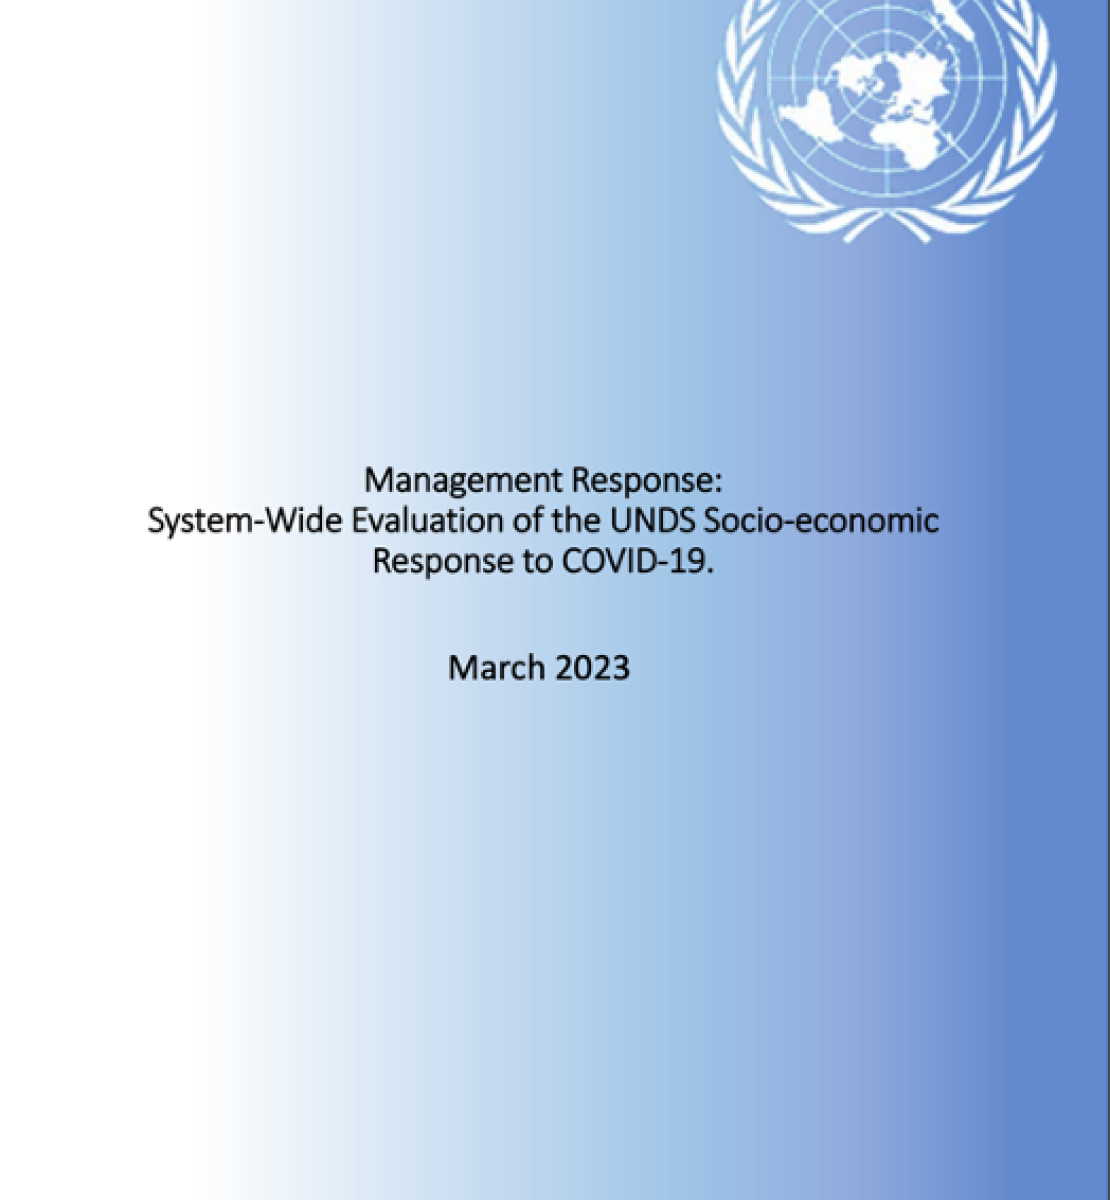 Cover page of the UN management response